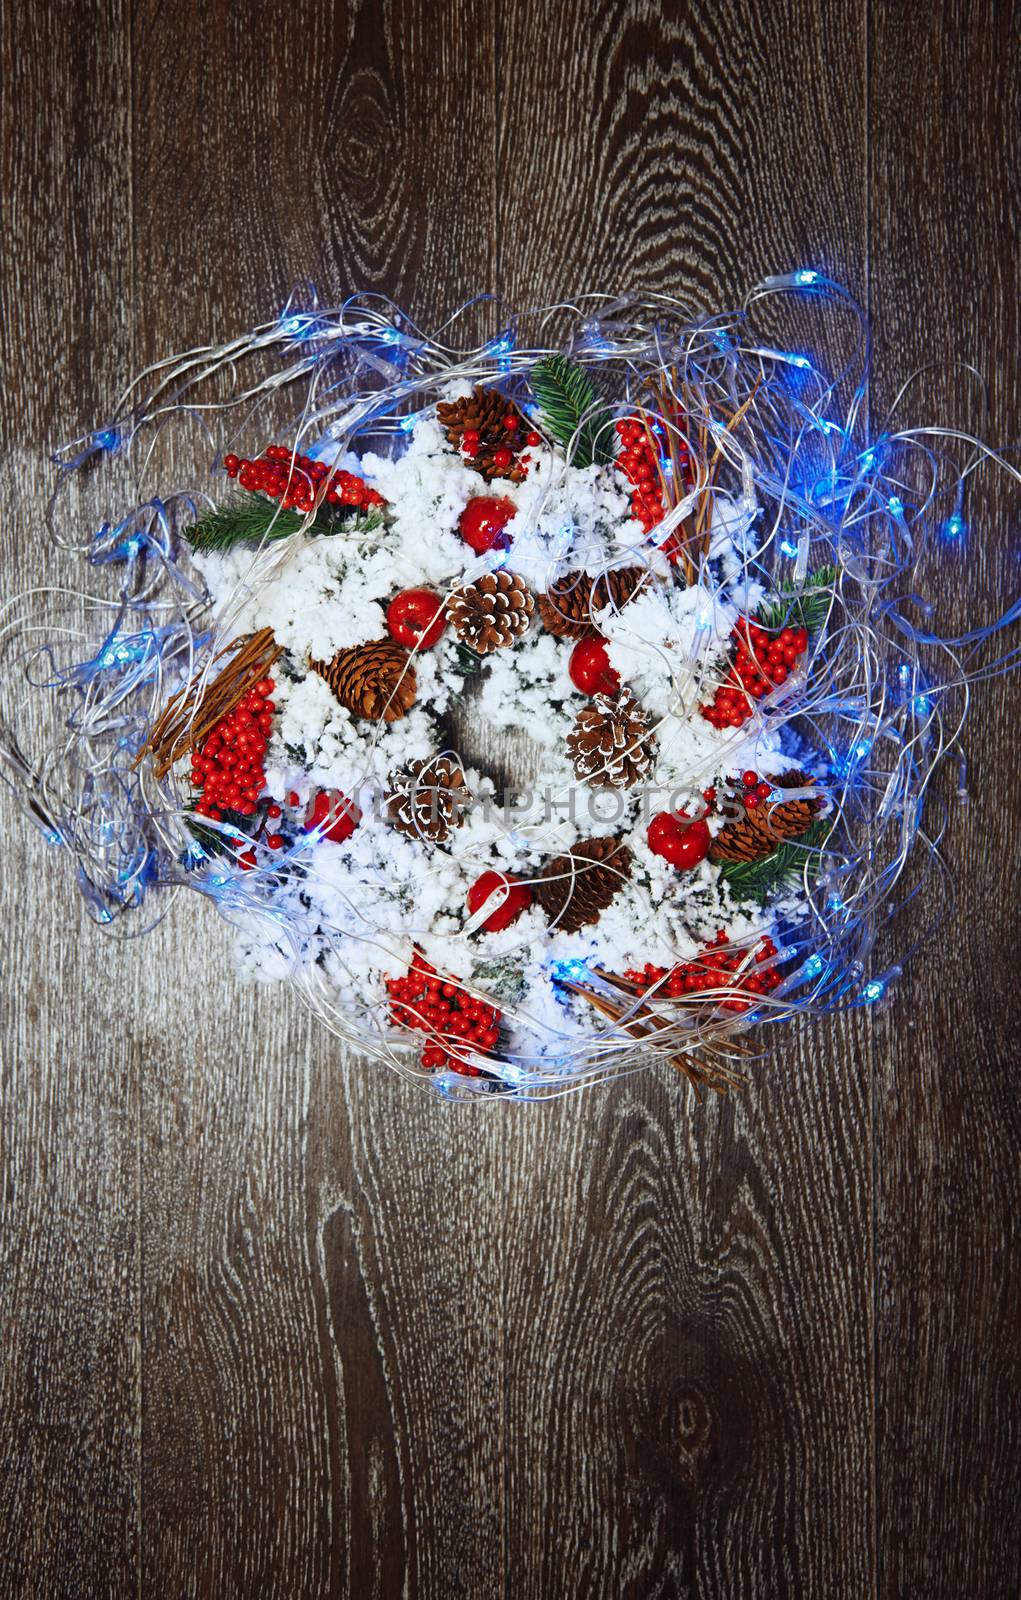 Christmas wreath and light by Novic